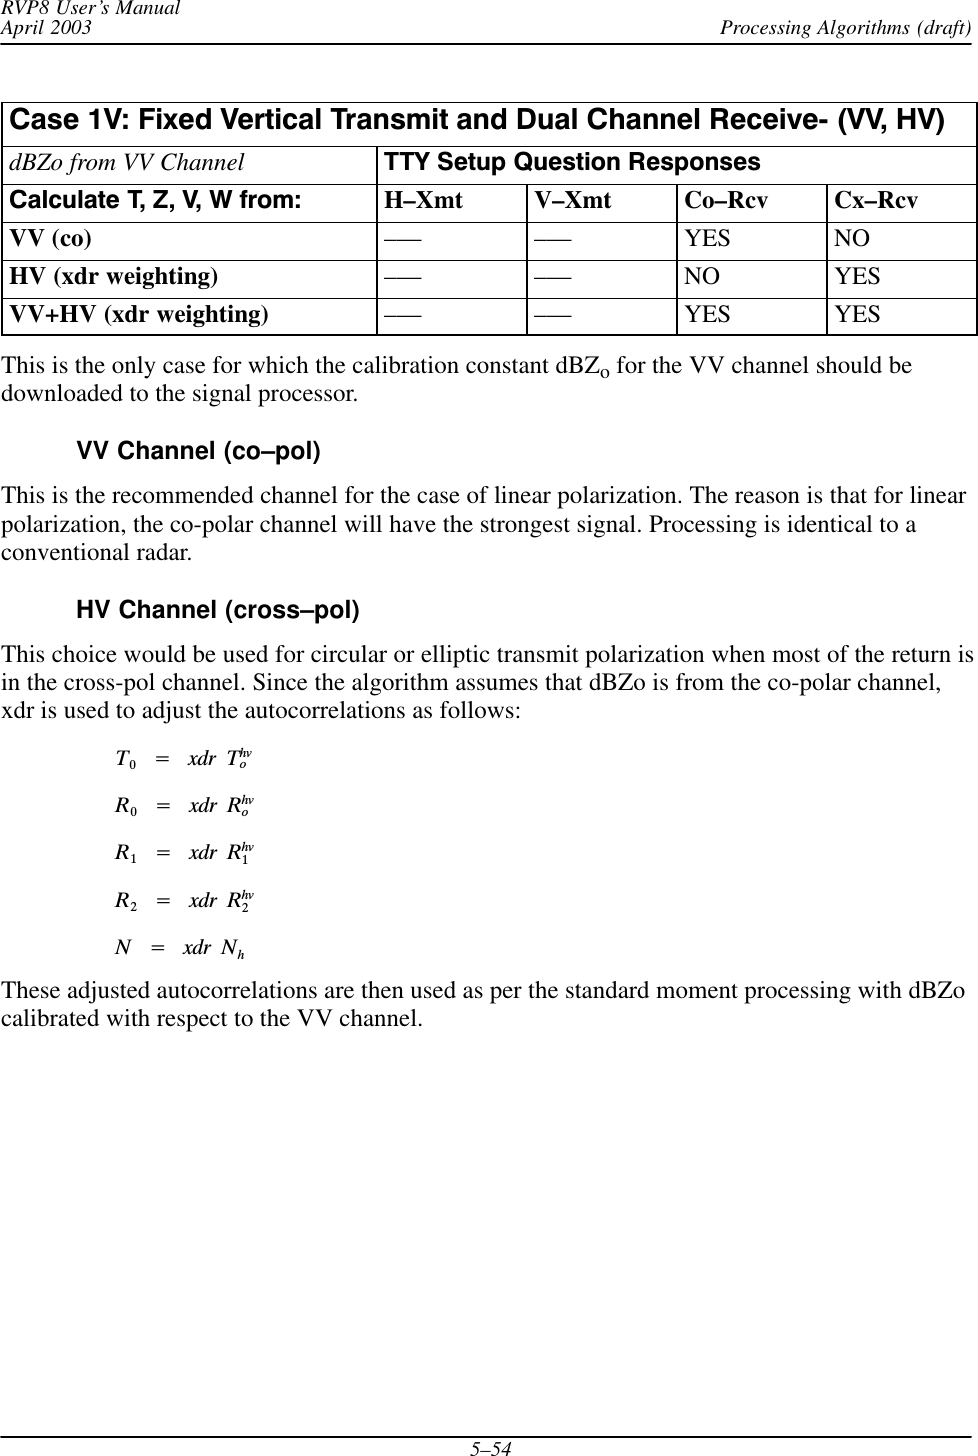 Processing Algorithms (draft)RVP8 User’s ManualApril 20035–54Case 1V: Fixed Vertical Transmit and Dual Channel ReceiveĆ (VV, HV)dBZo from VV Channel TTY Setup Question ResponsesCalculate T, Z, V, W from: H–Xmt V–Xmt Co–Rcv Cx–RcvVV (co) ––– ––– YES NOHV (xdr weighting) ––– ––– NO YESVV+HV (xdr weighting) ––– ––– YES YESThis is the only case for which the calibration constant dBZo for the VV channel should bedownloaded to the signal processor.VV Channel (co–pol)This is the recommended channel for the case of linear polarization. The reason is that for linearpolarization, the co-polar channel will have the strongest signal. Processing is identical to aconventional radar.HV Channel (cross–pol)This choice would be used for circular or elliptic transmit polarization when most of the return isin the cross-pol channel. Since the algorithm assumes that dBZo is from the co-polar channel,xdr is used to adjust the autocorrelations as follows:T0Ą+ĄxdrĄThvoR0Ą+ĄxdrĄRhvoR1Ą+ĄxdrĄRhv1R2Ą+ĄxdrĄRhv2NĄ+ĄxdrĄNhThese adjusted autocorrelations are then used as per the standard moment processing with dBZocalibrated with respect to the VV channel.